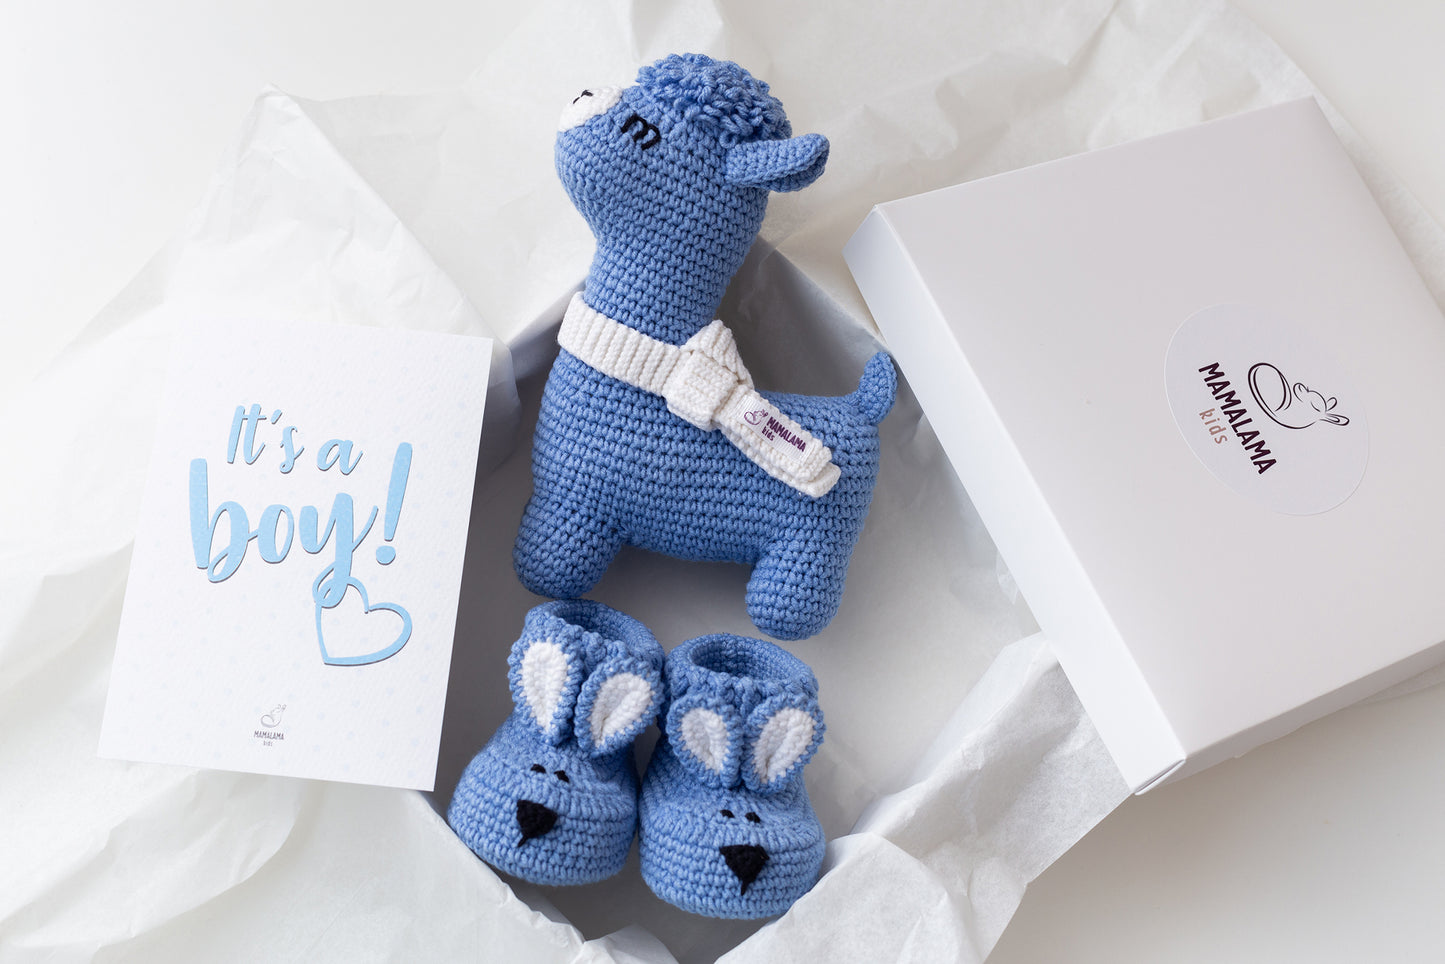 Zooawa Baby Boy Gifts, Baby Shower Gifts for Boys, Comoros